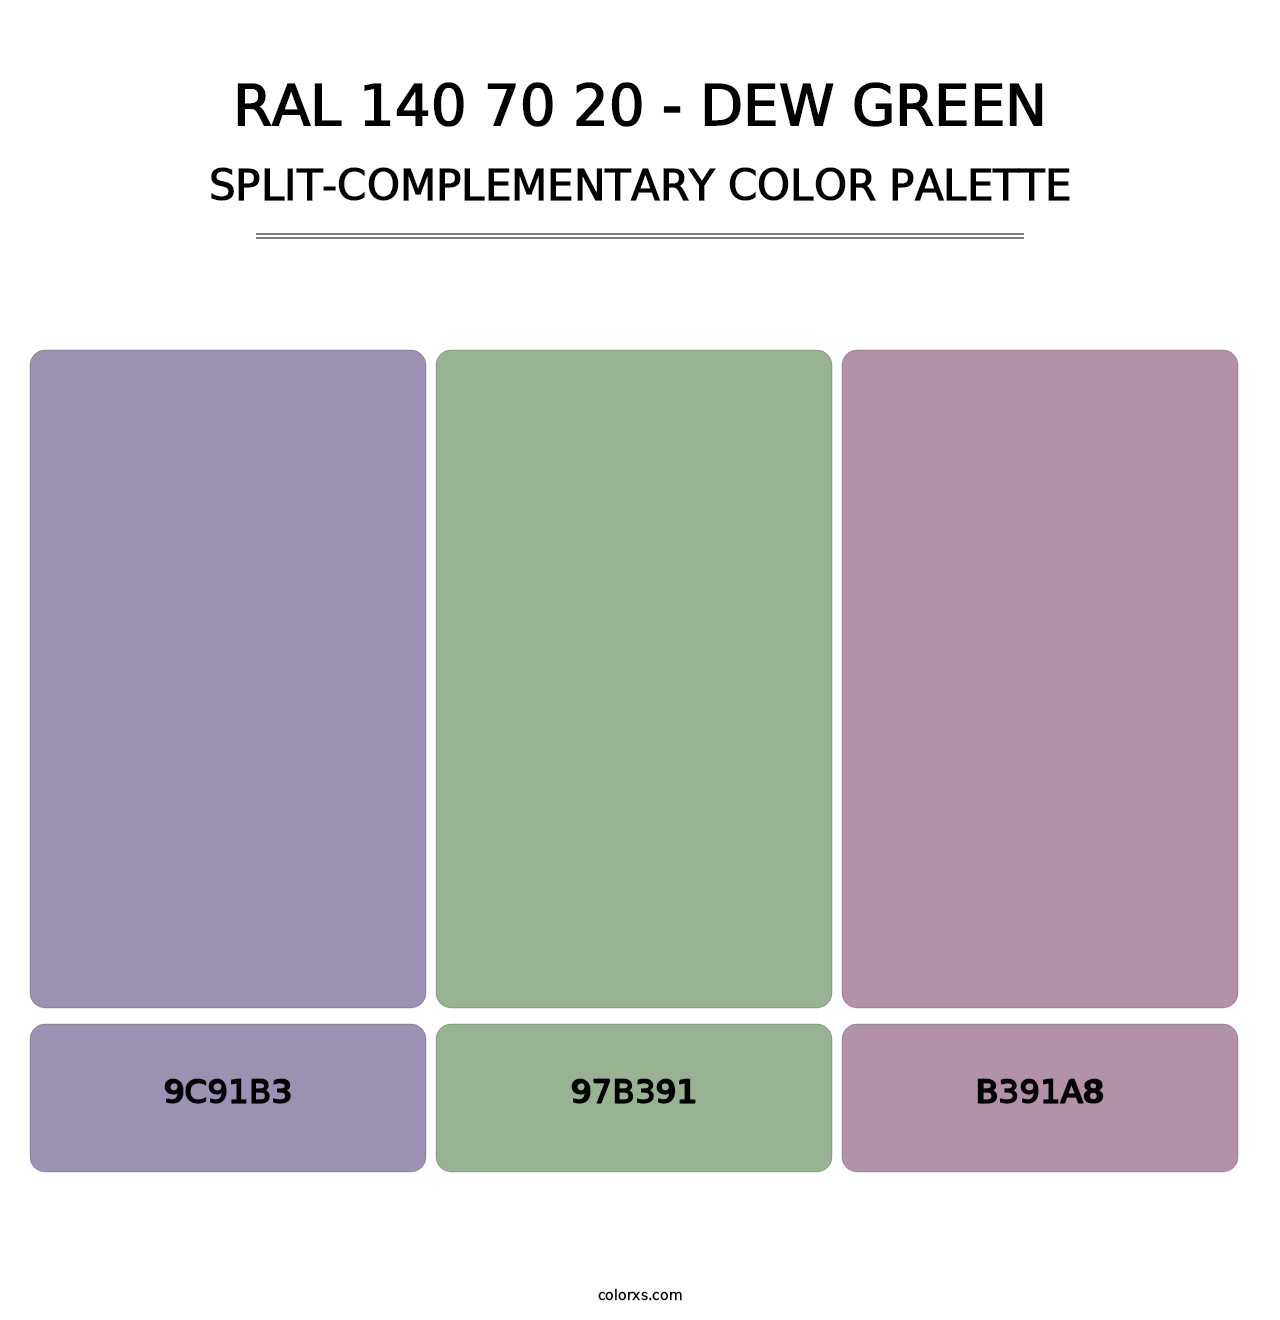 RAL 140 70 20 - Dew Green - Split-Complementary Color Palette